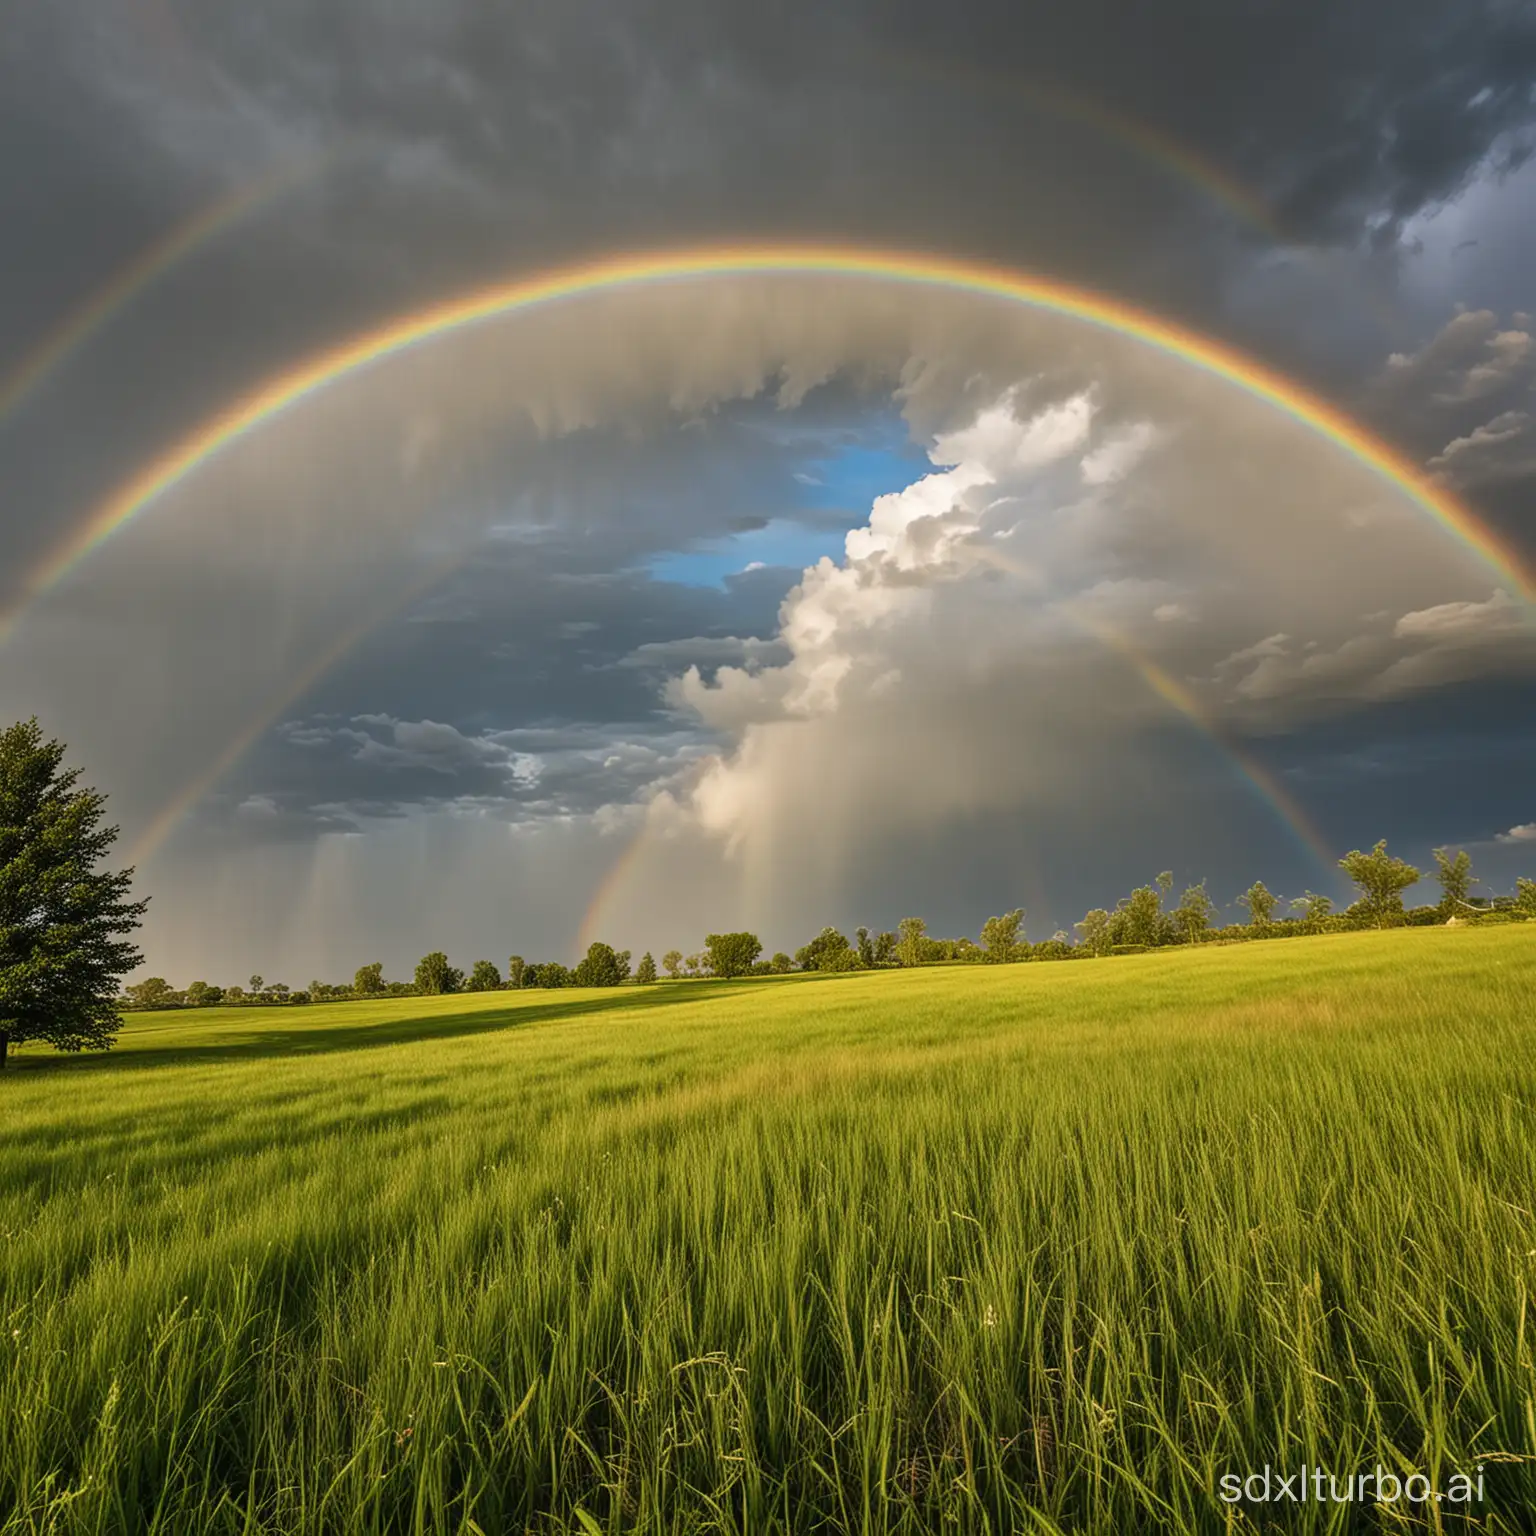 Dramatically peaceful clouds gathered and a rainbow appeared in the clear sky. The grass bursts with hope and new life, full of greenery behind the rainbows.